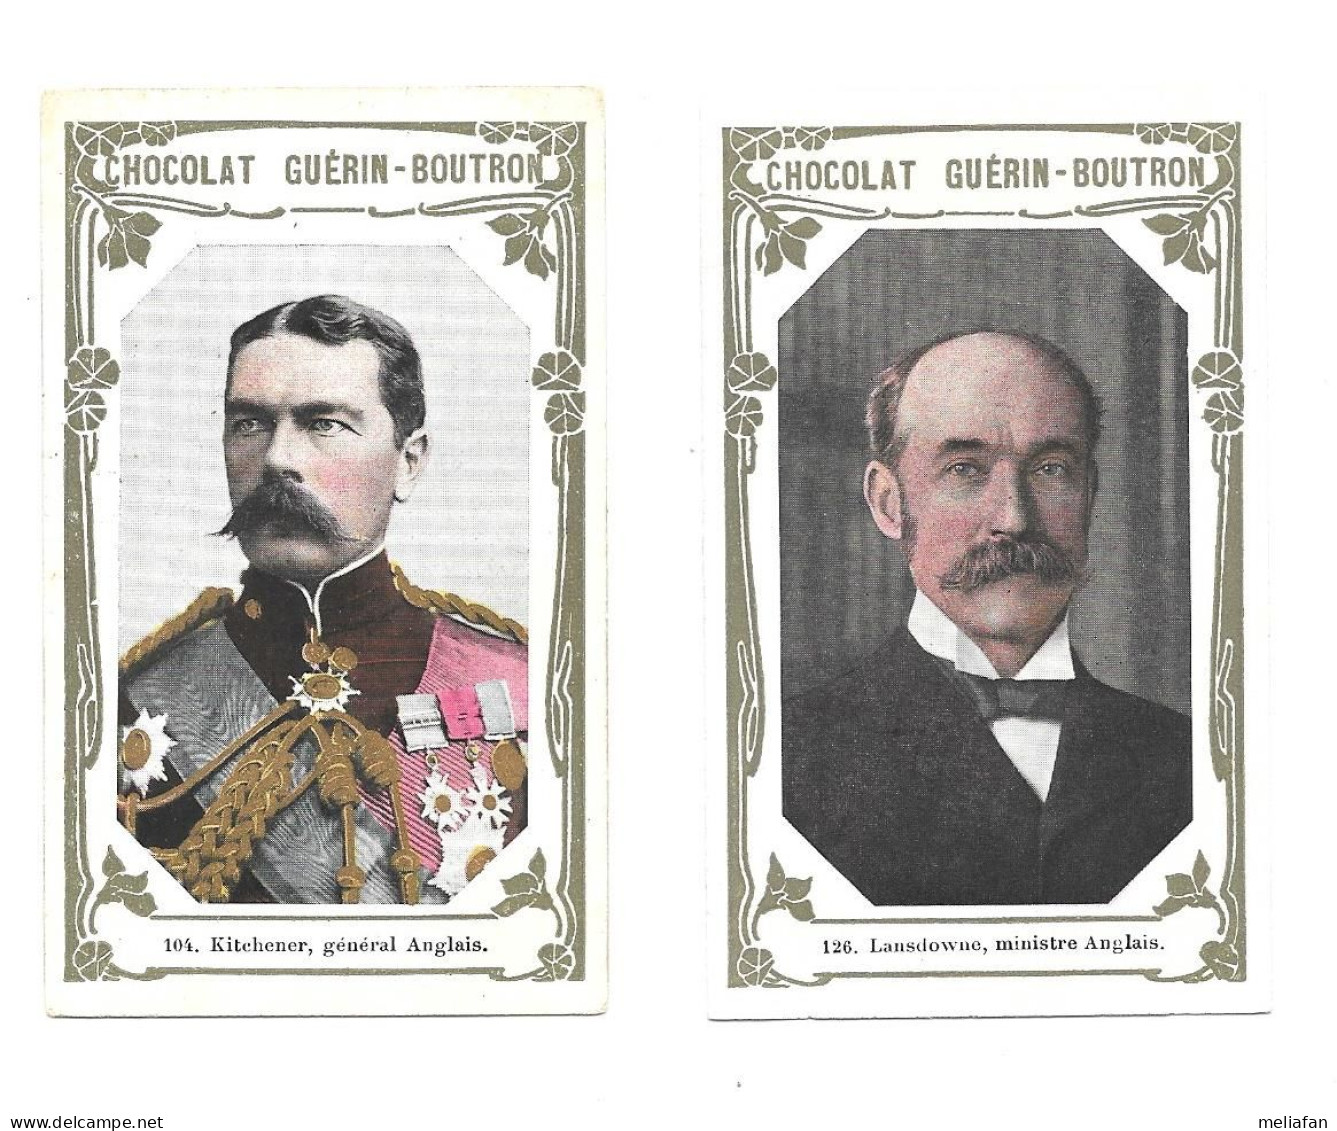 BW49 - GUERIN BOUTRON CHOCOLATE CARDS - LORD KITCHENER - LASDOWNE PRIME MINISTER - Guérin-Boutron